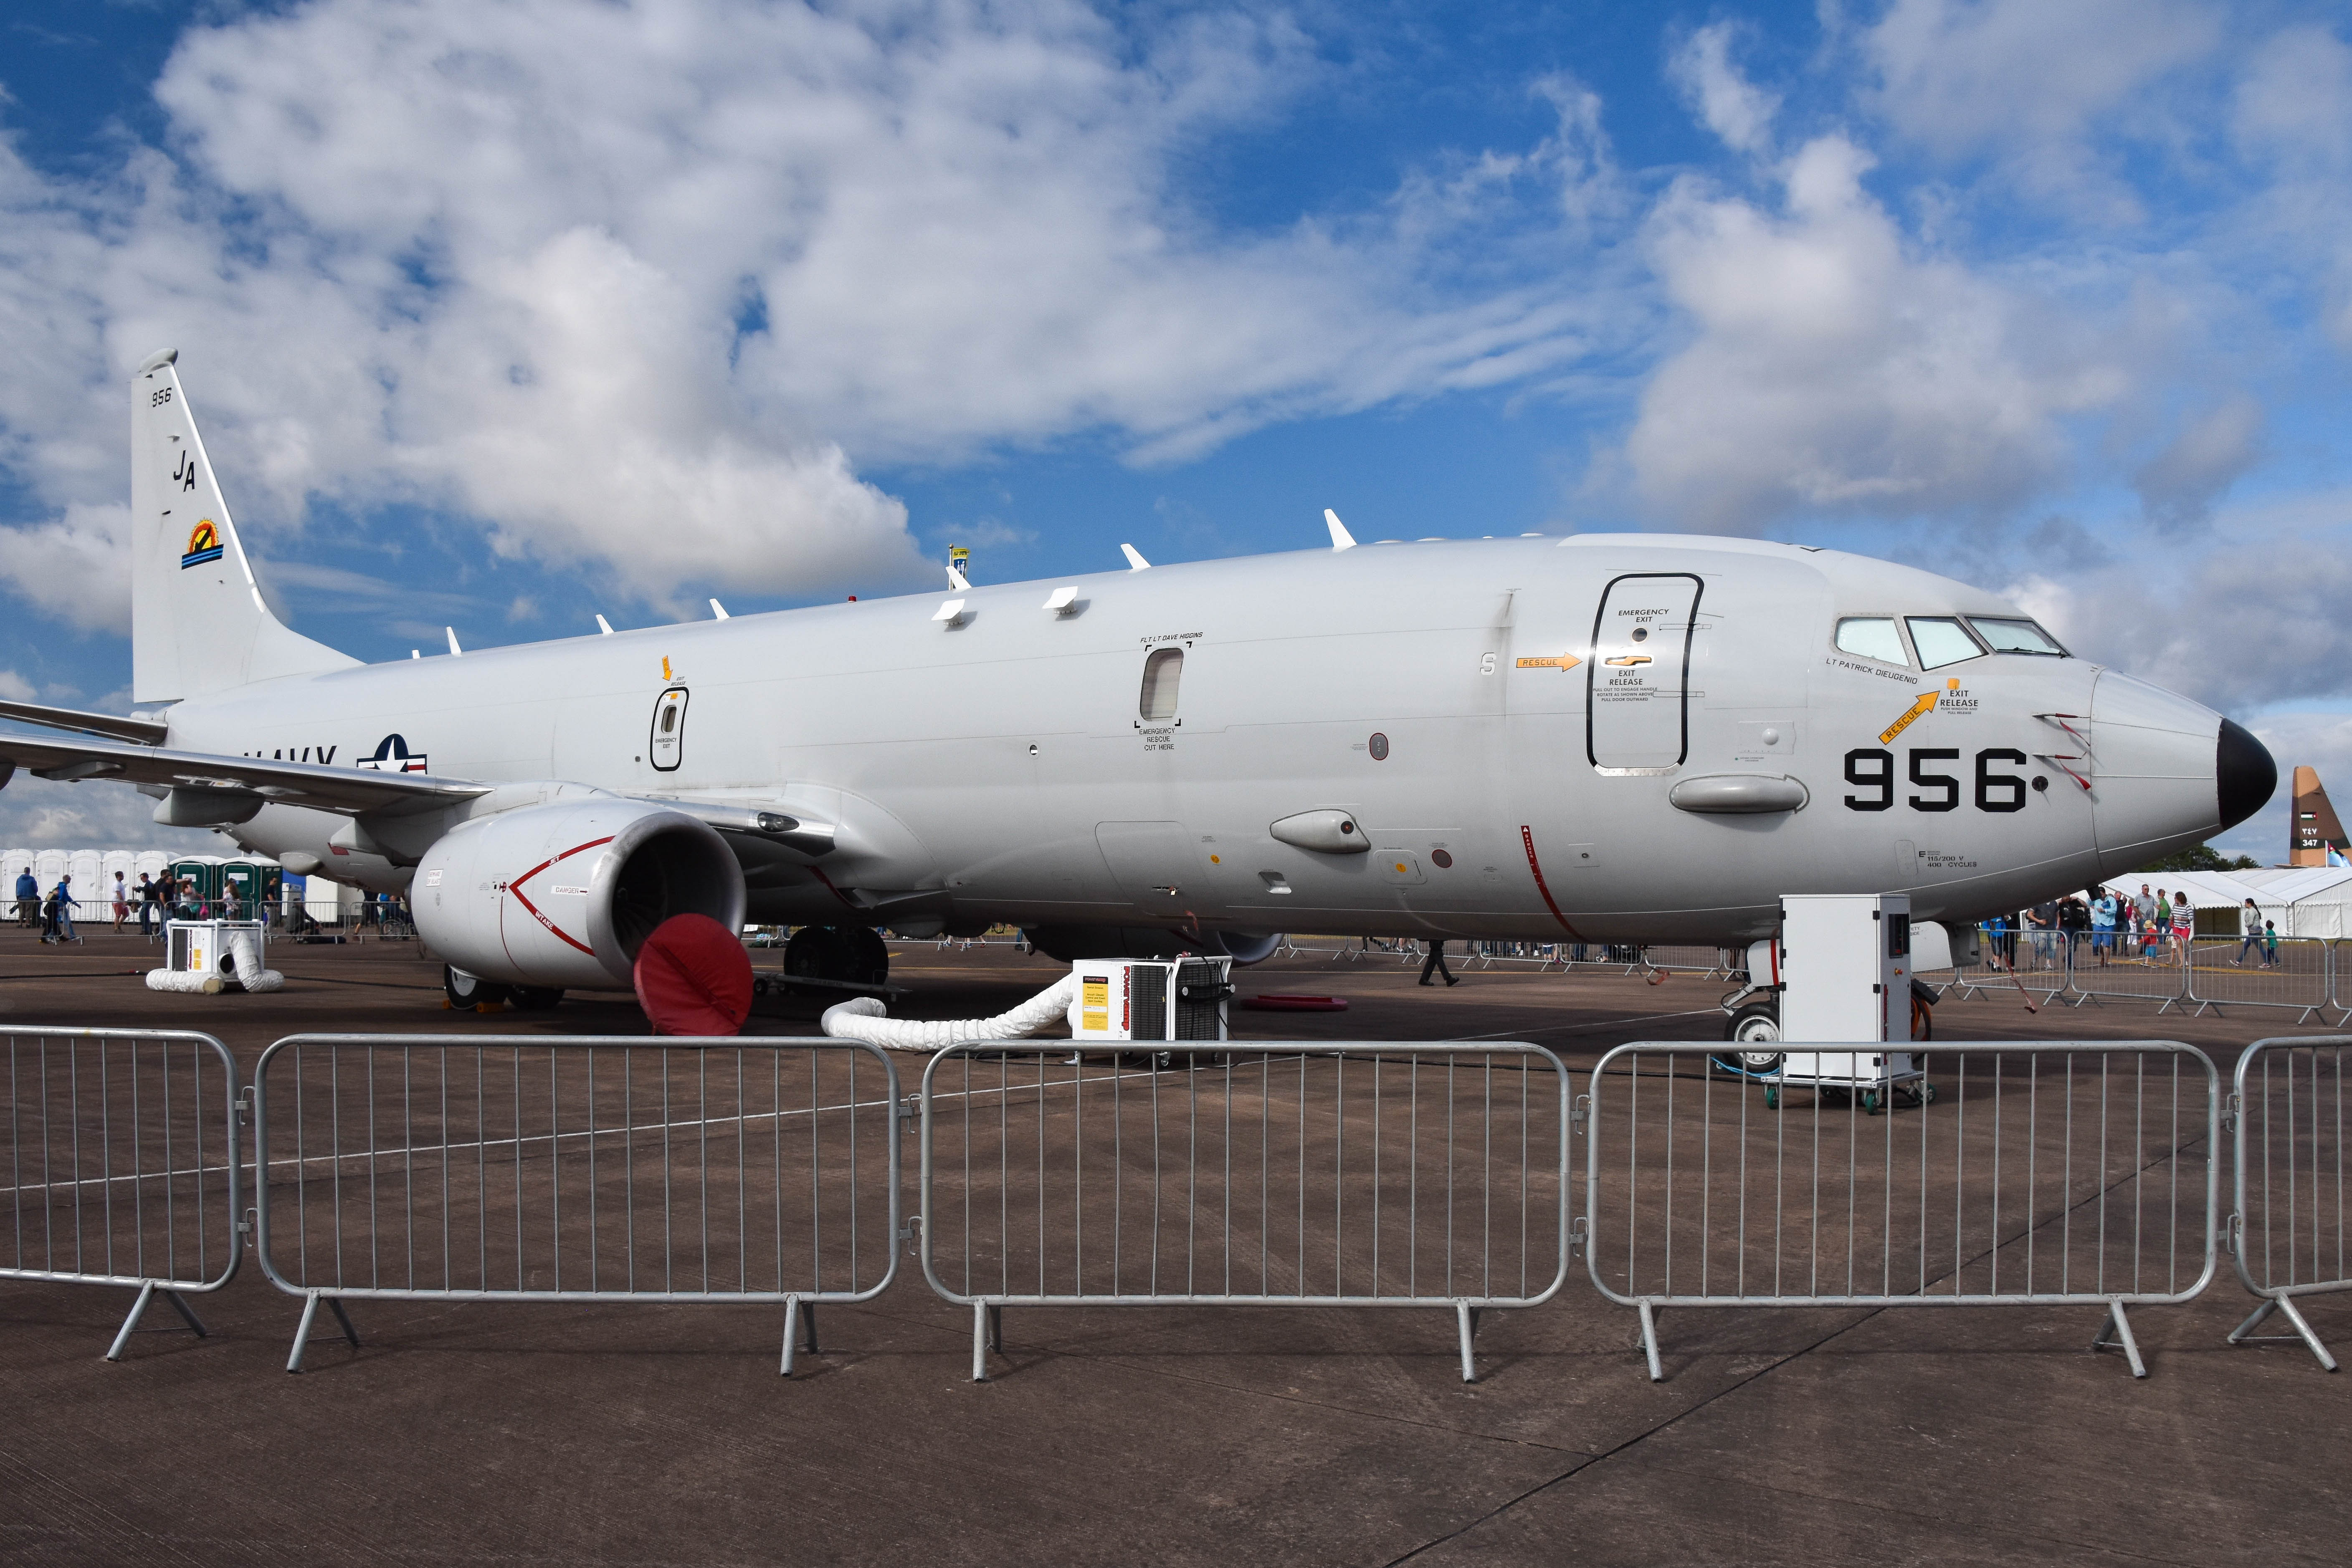 167956/167956 USN - United States Navy Boeing P-8A Poseidon Photo by colinw - AVSpotters.com